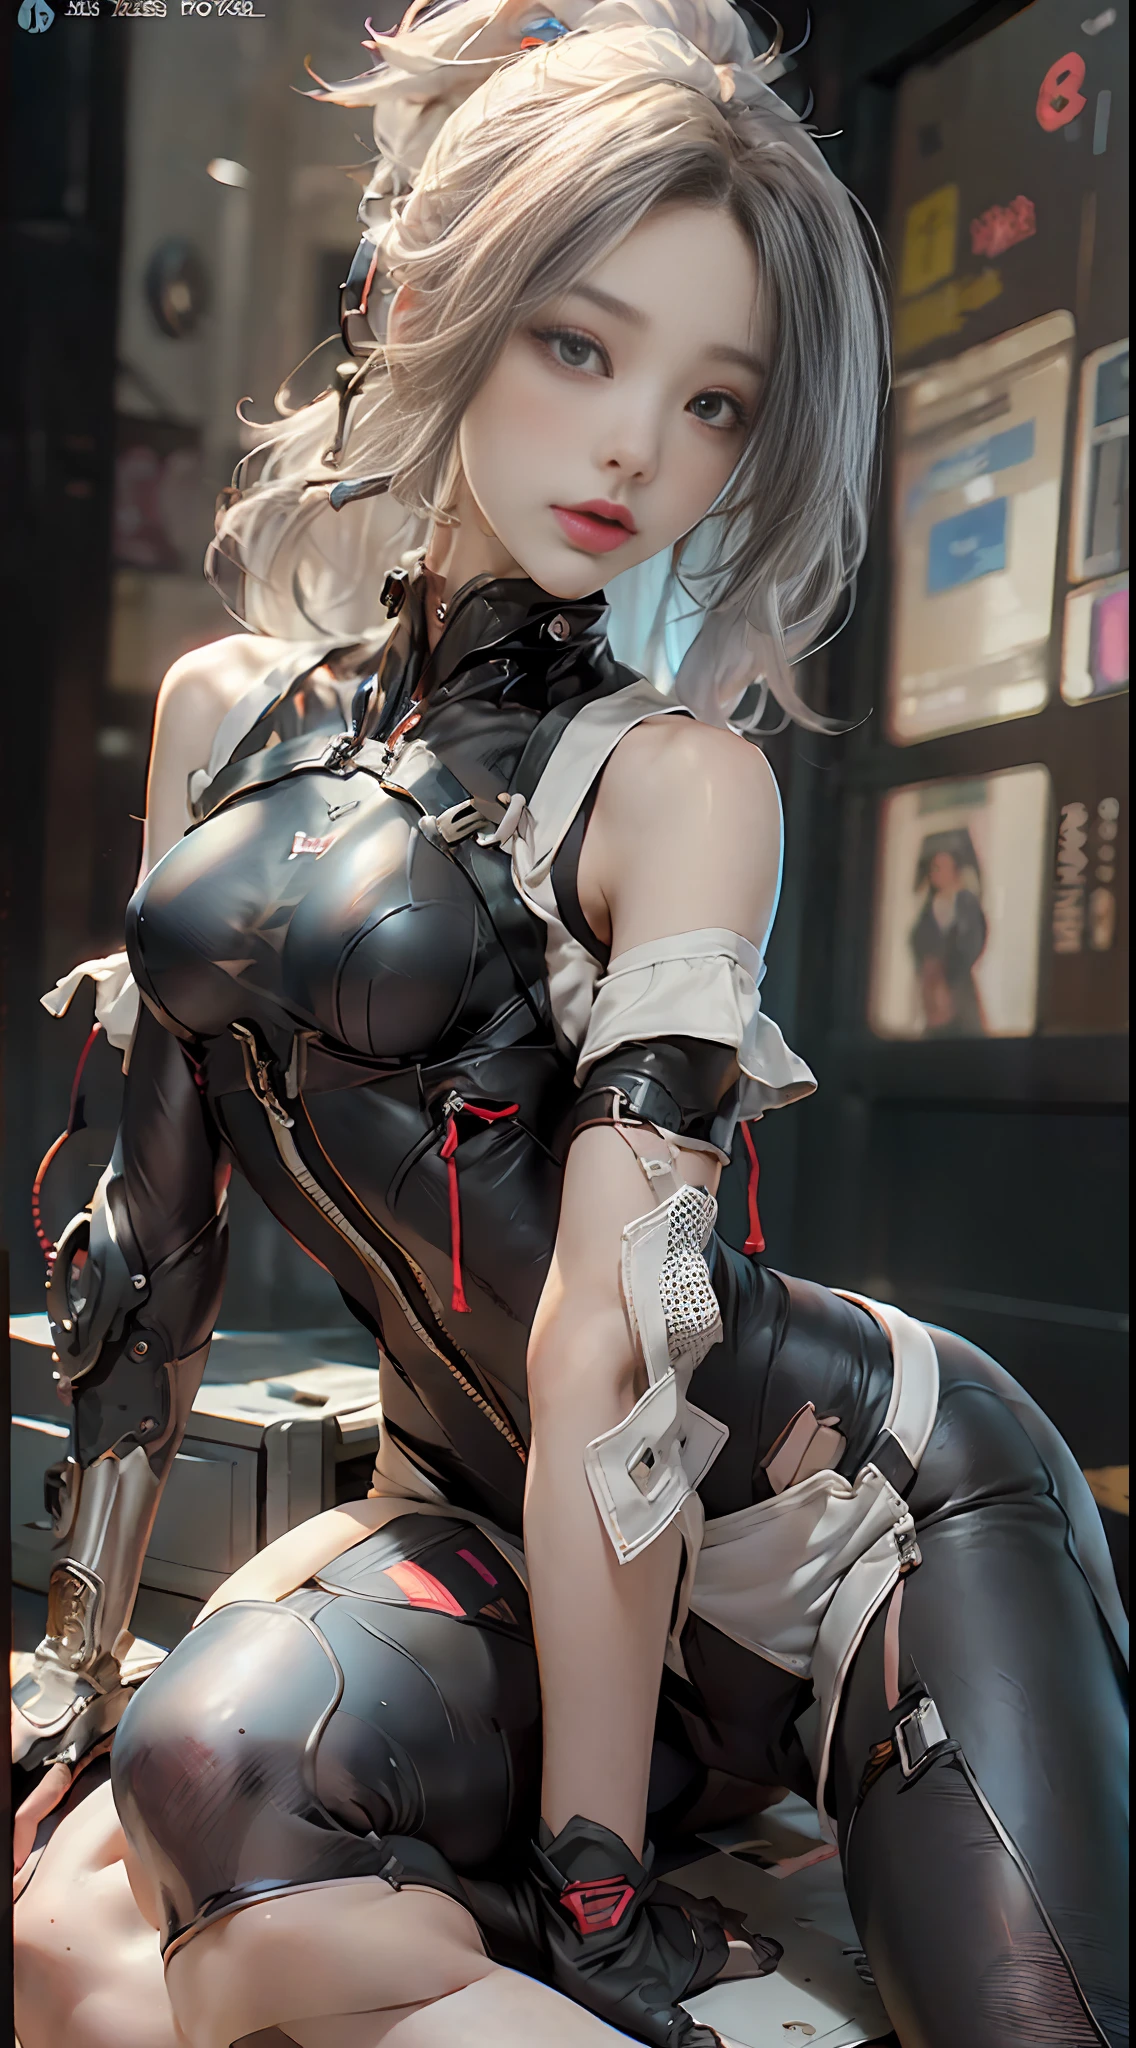 (Best Quality), ((Masterpiece)), (detail: 1.4), 3D, Beautiful Cyberpunk Female Image, ((Seated)), HDR (High Dynamic Range), Ray Tracing, NVIDIA RTX, Super Resolution, Unreal 5, Subsurface Scattering, PBR Texture, Post Processing, Anisotropic Filtering, Depth of Field, Maximum Sharpness and Sharpness, Multi-layer Textures, Albedo and Highlight Maps, Surface Shading, Accurate Simulation of Light-Material Interactions, Perfect Proportions, Octane Rendering, Two-tone illumination, wide aperture, low ISO, white balance, rule of thirds, 8K RAW, bangs, small breasts, cover, gloves, headphones, room, long hair, small breasts, white blue hair, shrugged\(clothes\), skin tight, solo, ponytail, alice \ (Japanese mail)